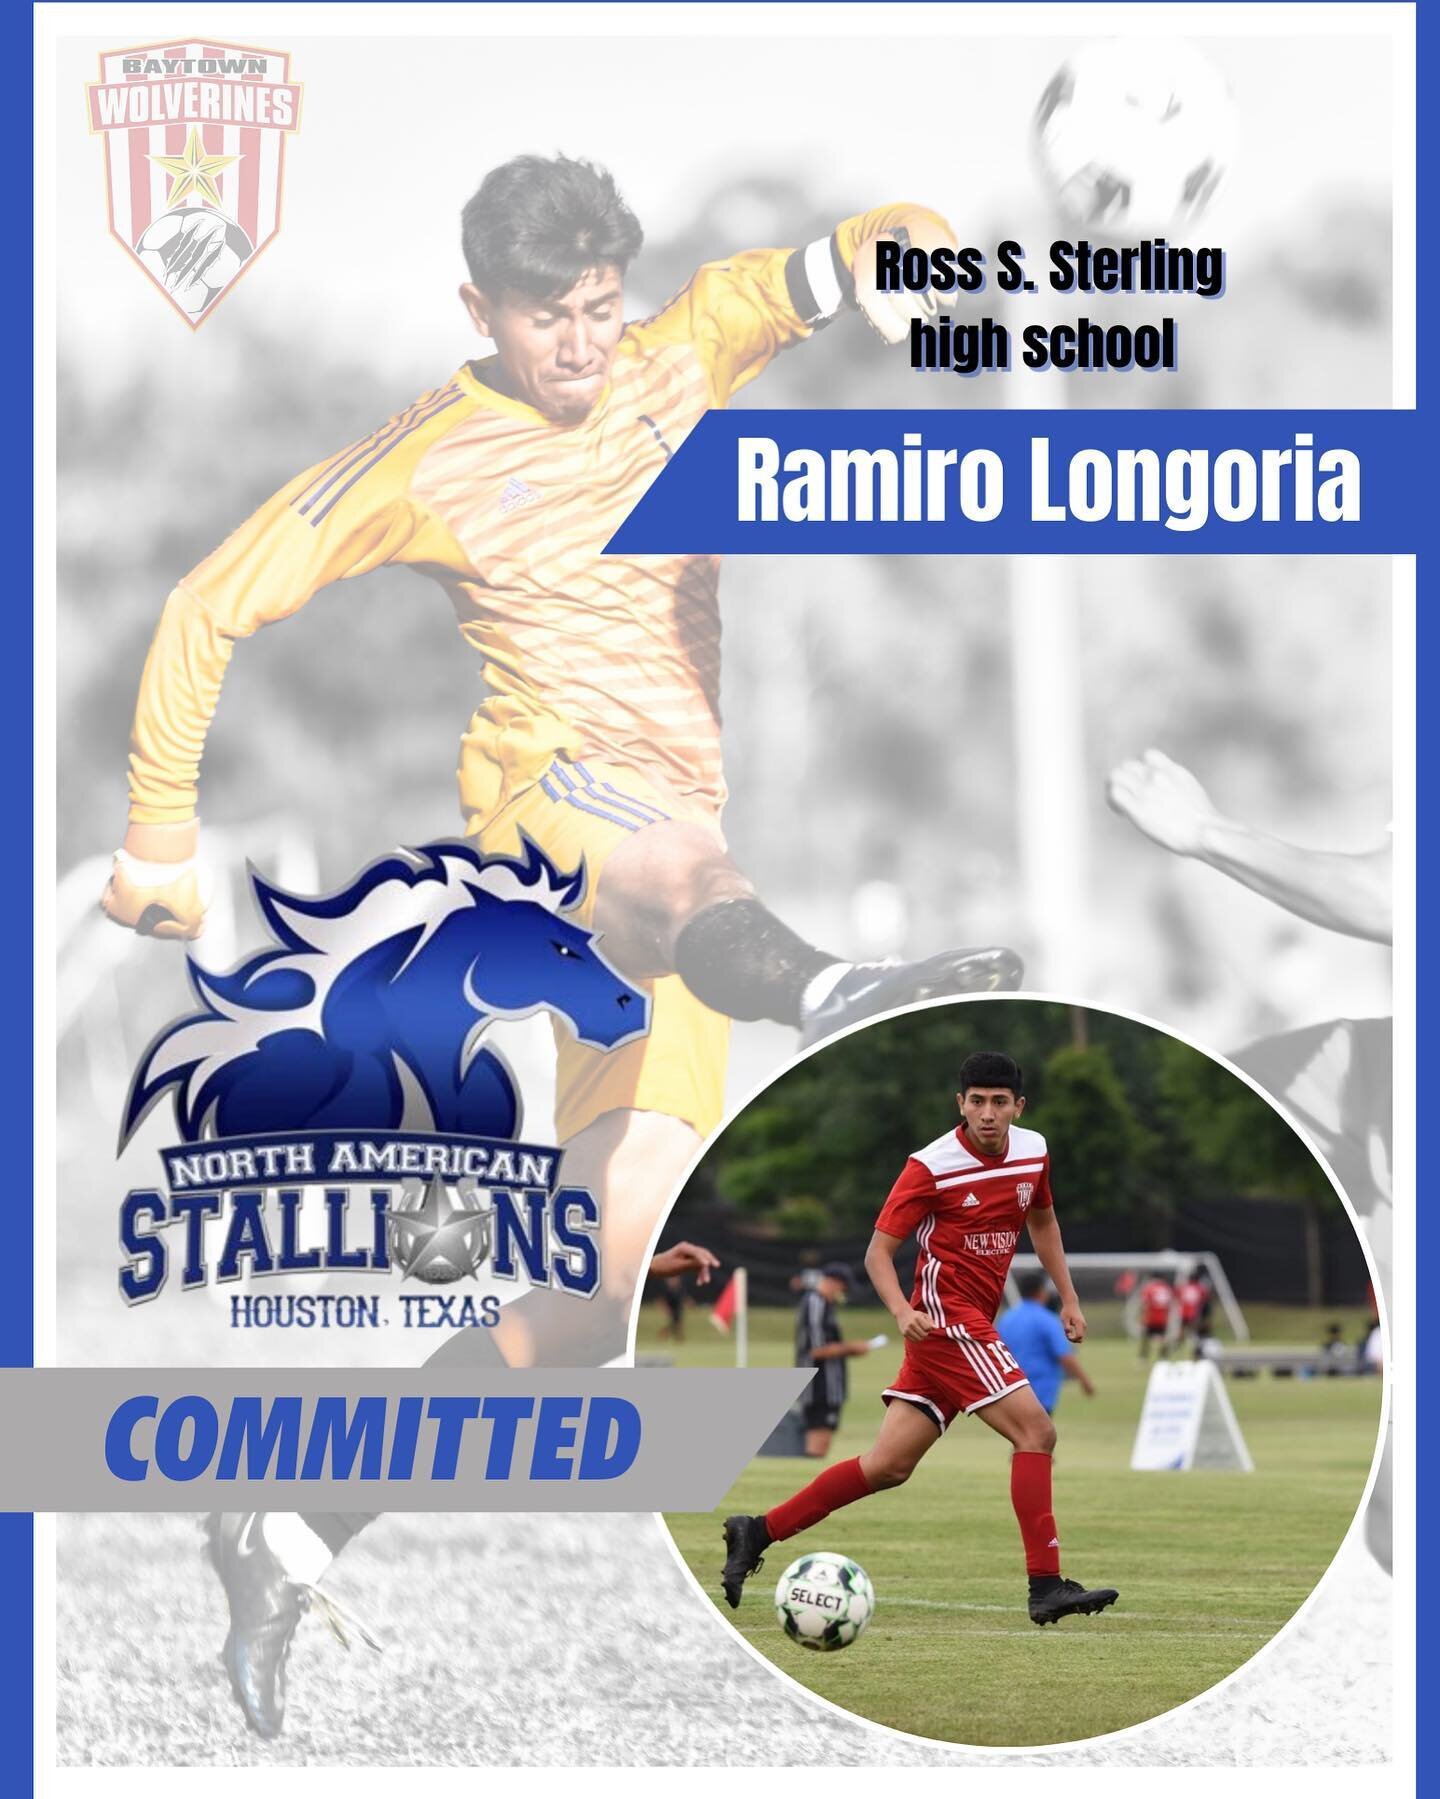 College Announcement!

Ramiro Longoria, a senior at Ross S. Sterling high school, is a Baytown Saints YSC and Baytown Wolverines alum. As a result of his development at Baytown Saints and his talent, Ramiro was invited to play on a top tier team whic